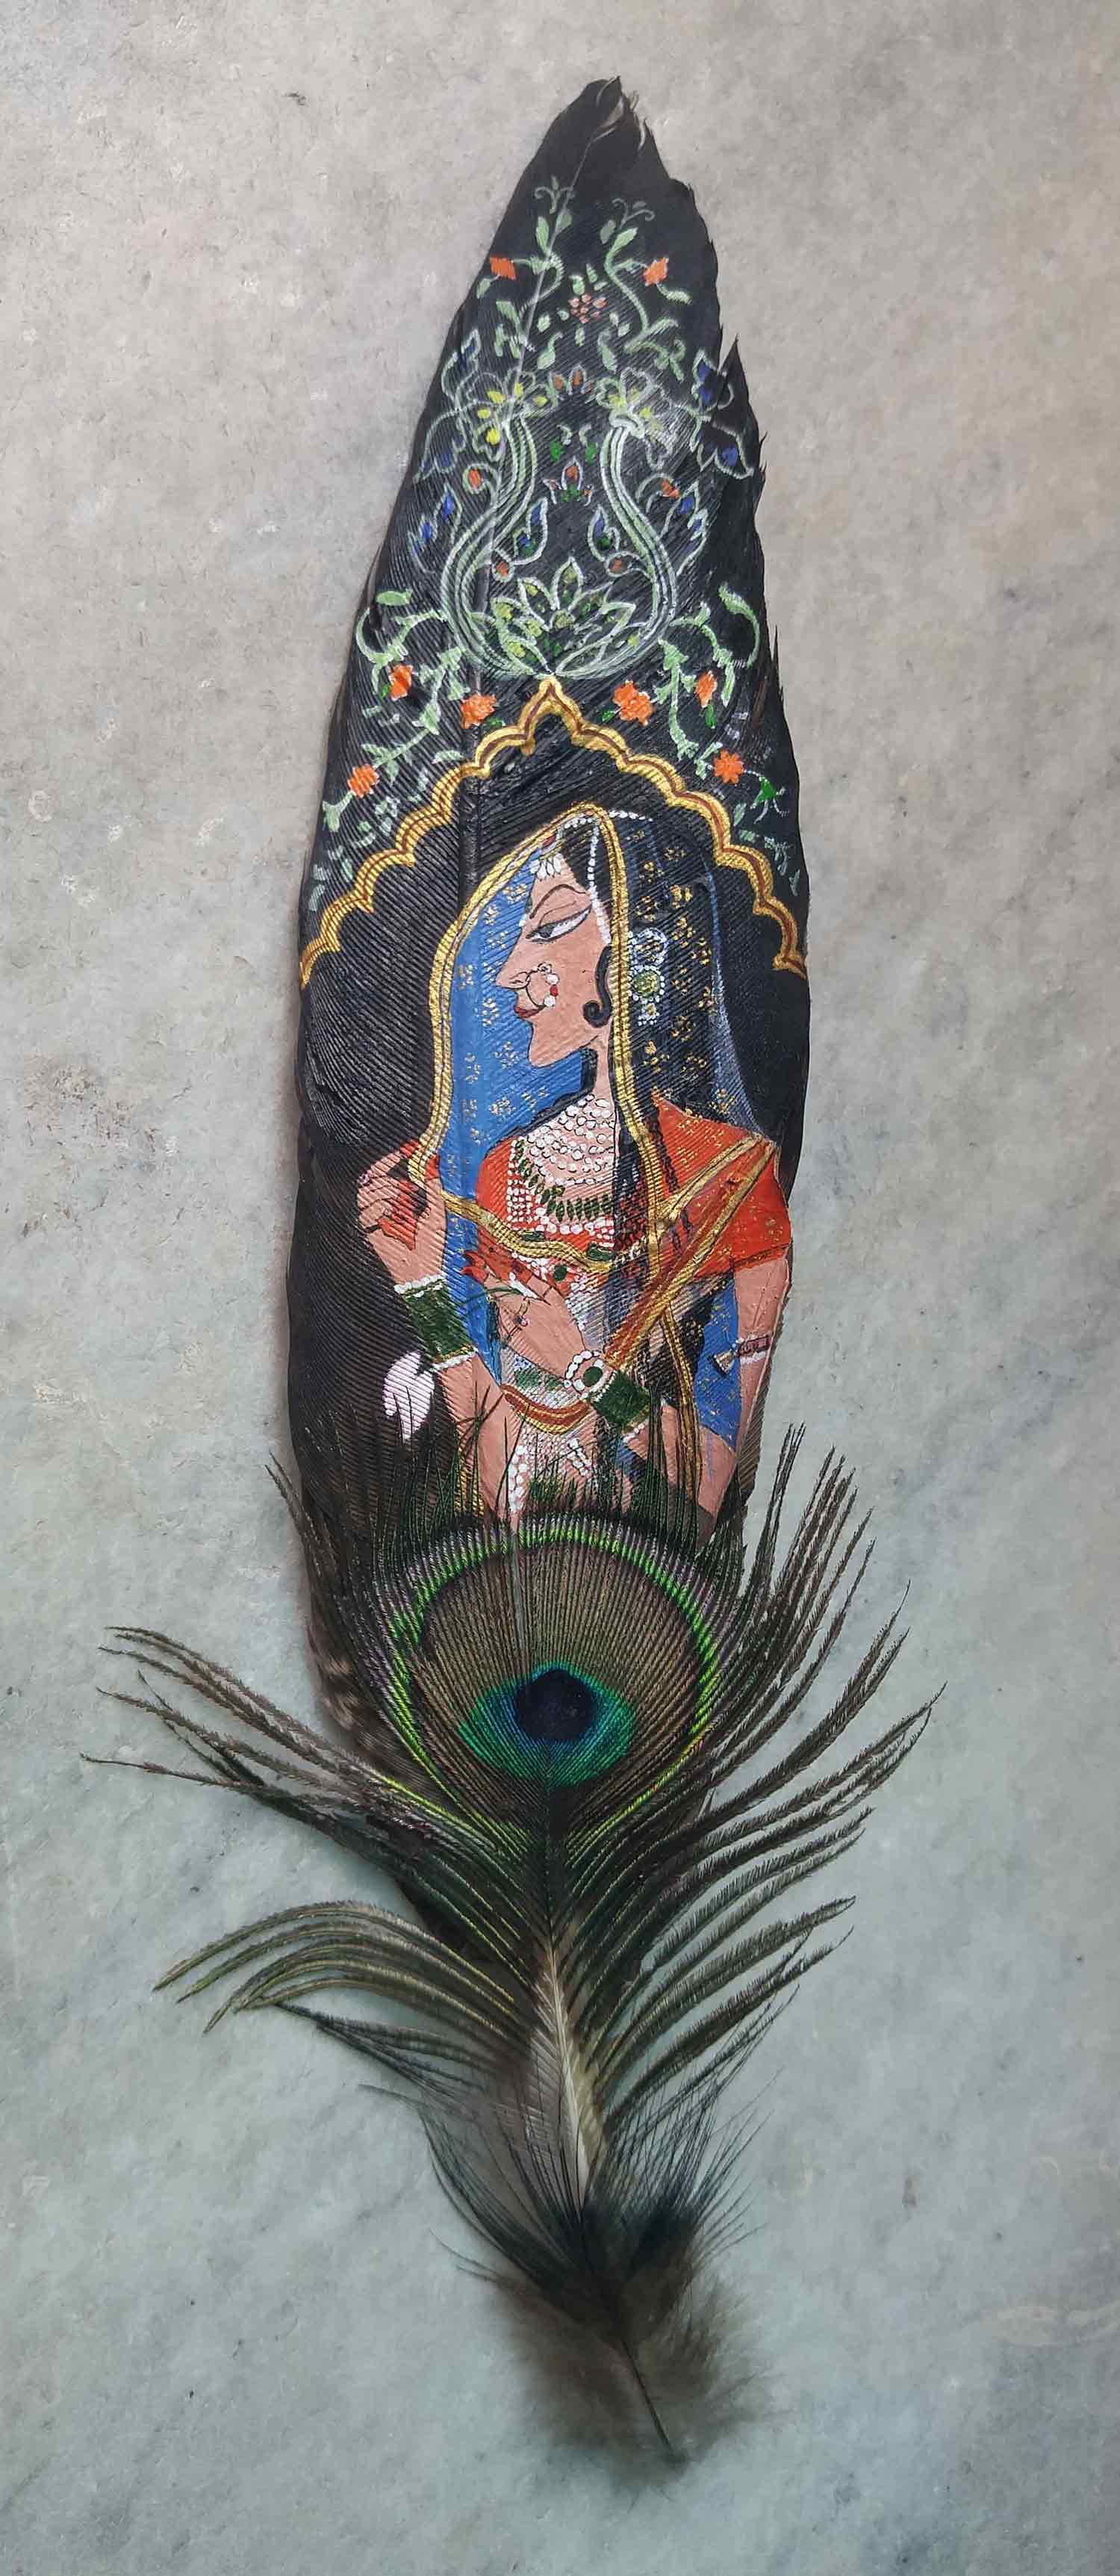 Figurative Painting with Mixed Media on Feather "Bani Thani" art by Aditi Agarwal